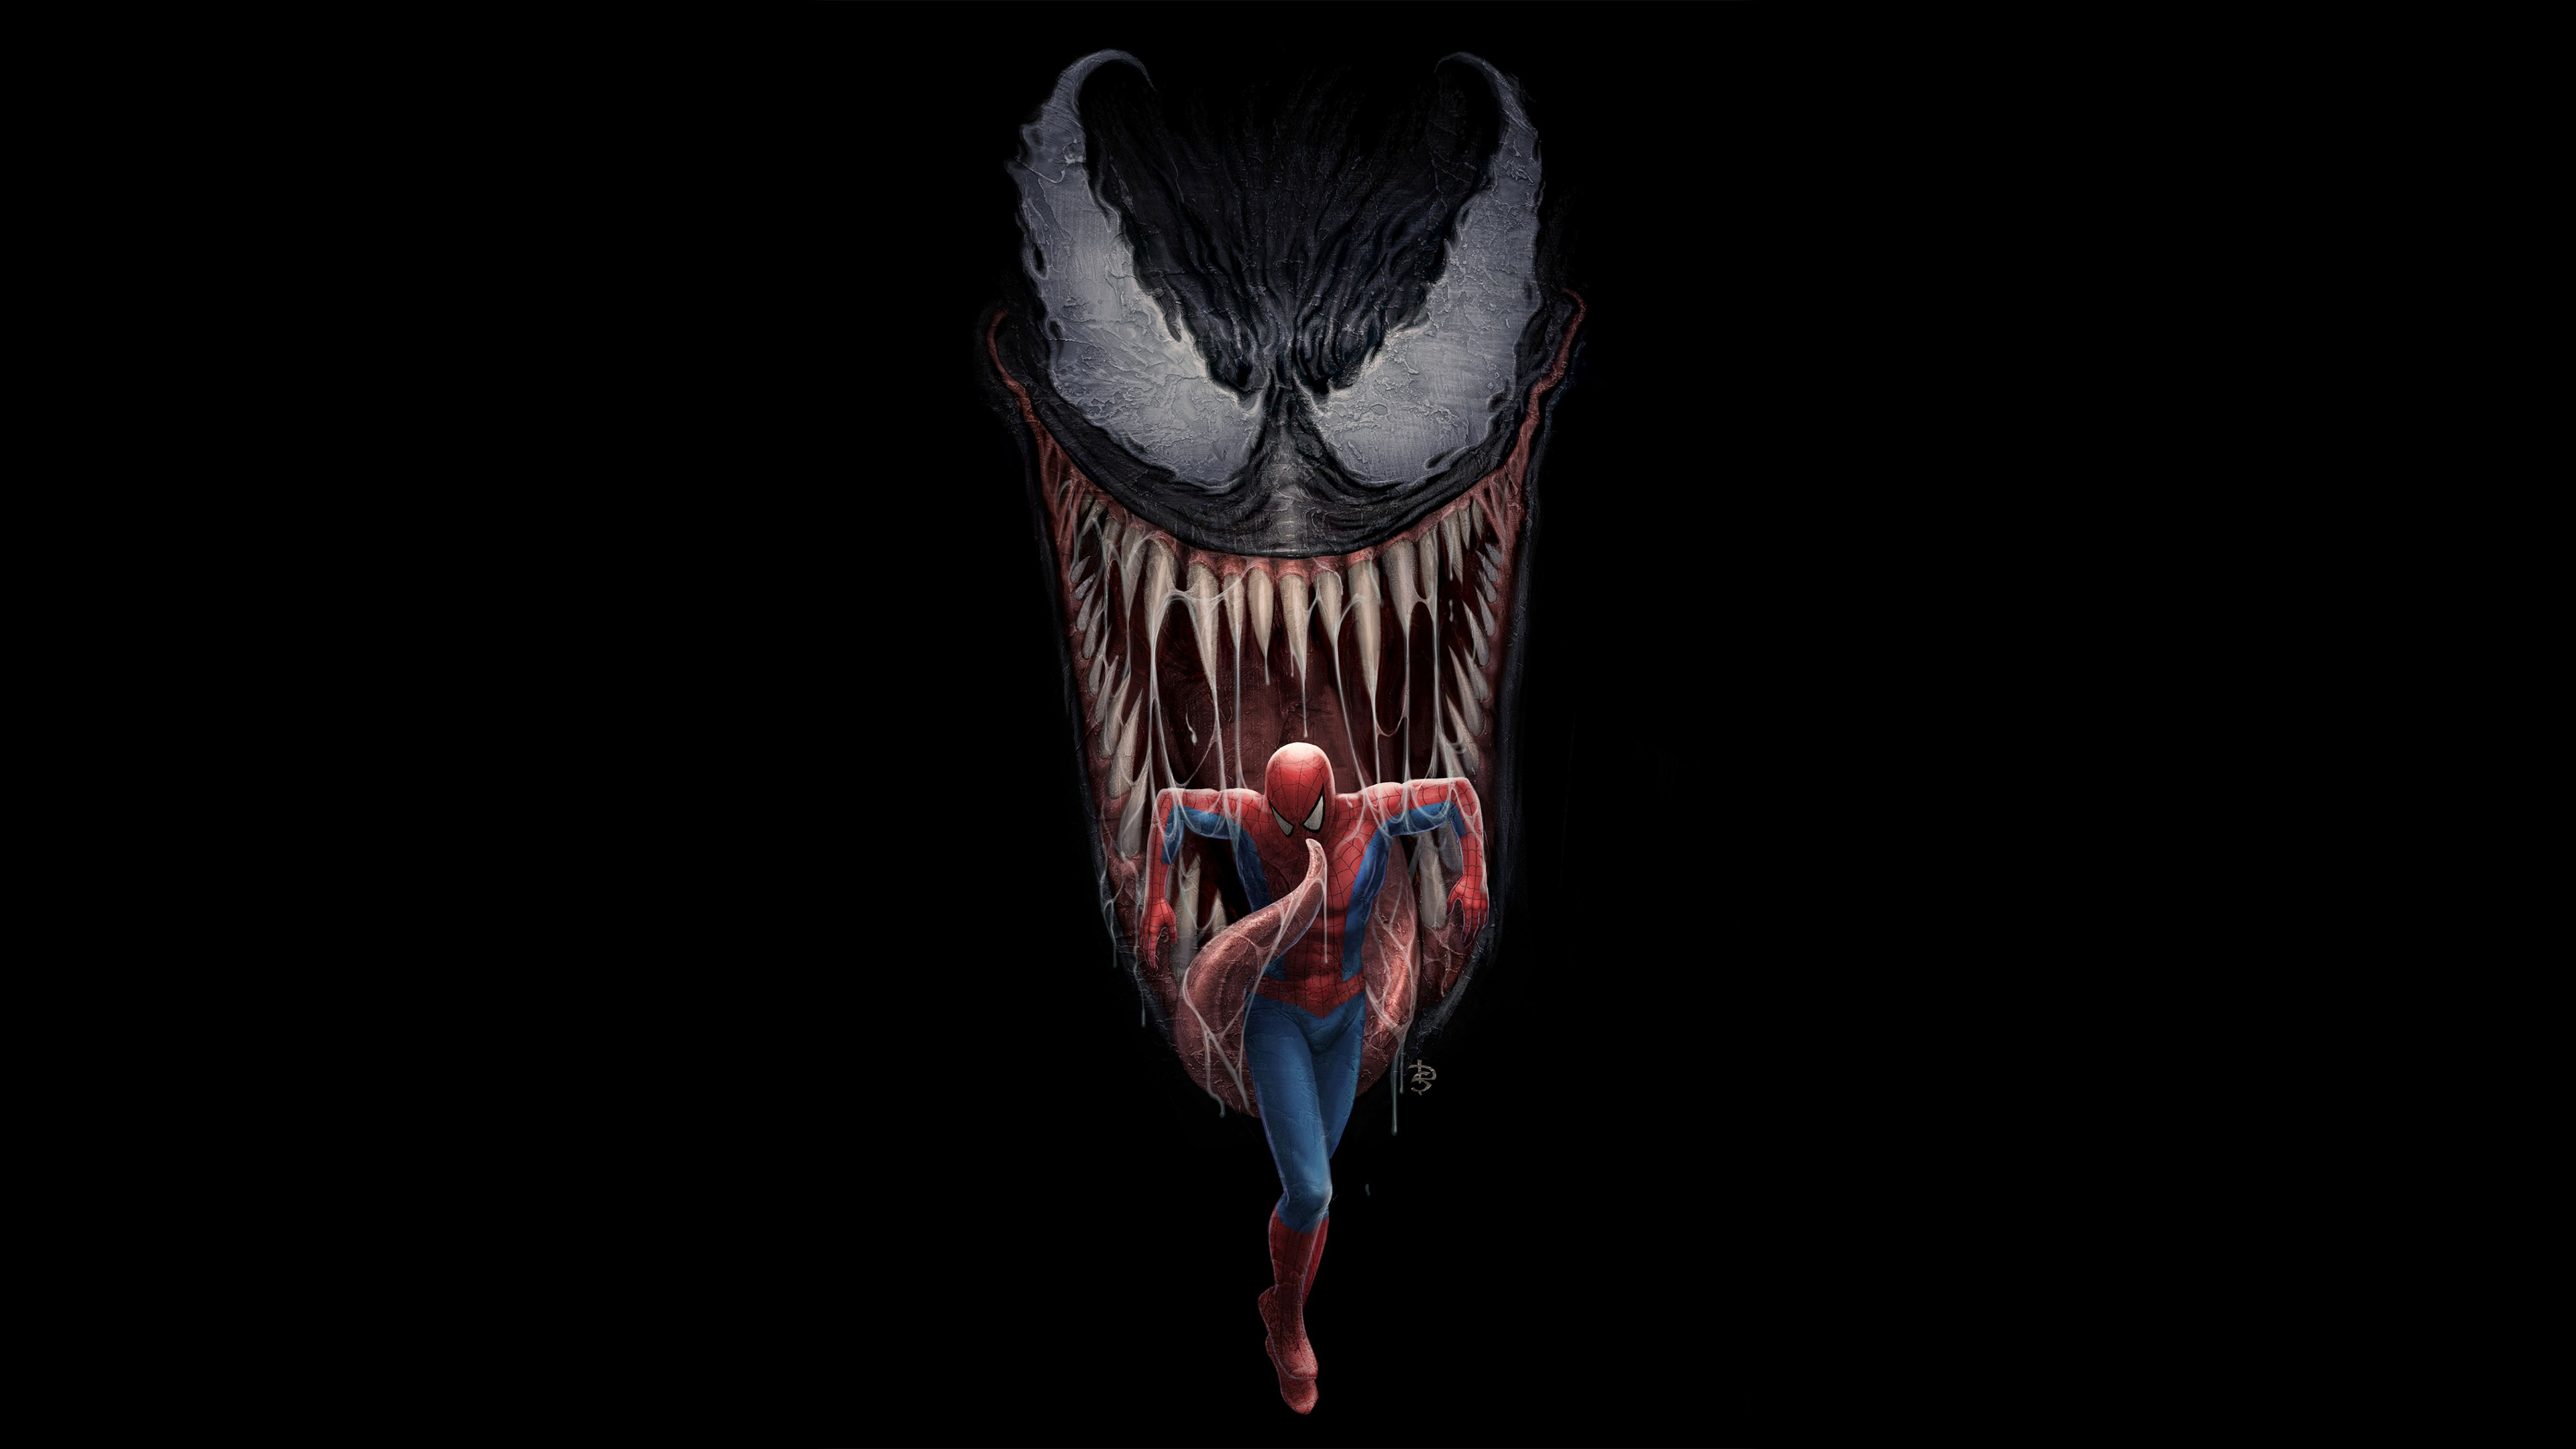 spiderman and venom artwork 1536523883 - Spiderman And Venom Artwork - Venom wallpapers, supervillain wallpapers, superheroes wallpapers, spiderman wallpapers, hd-wallpapers, digital art wallpapers, artwork wallpapers, 4k-wallpapers